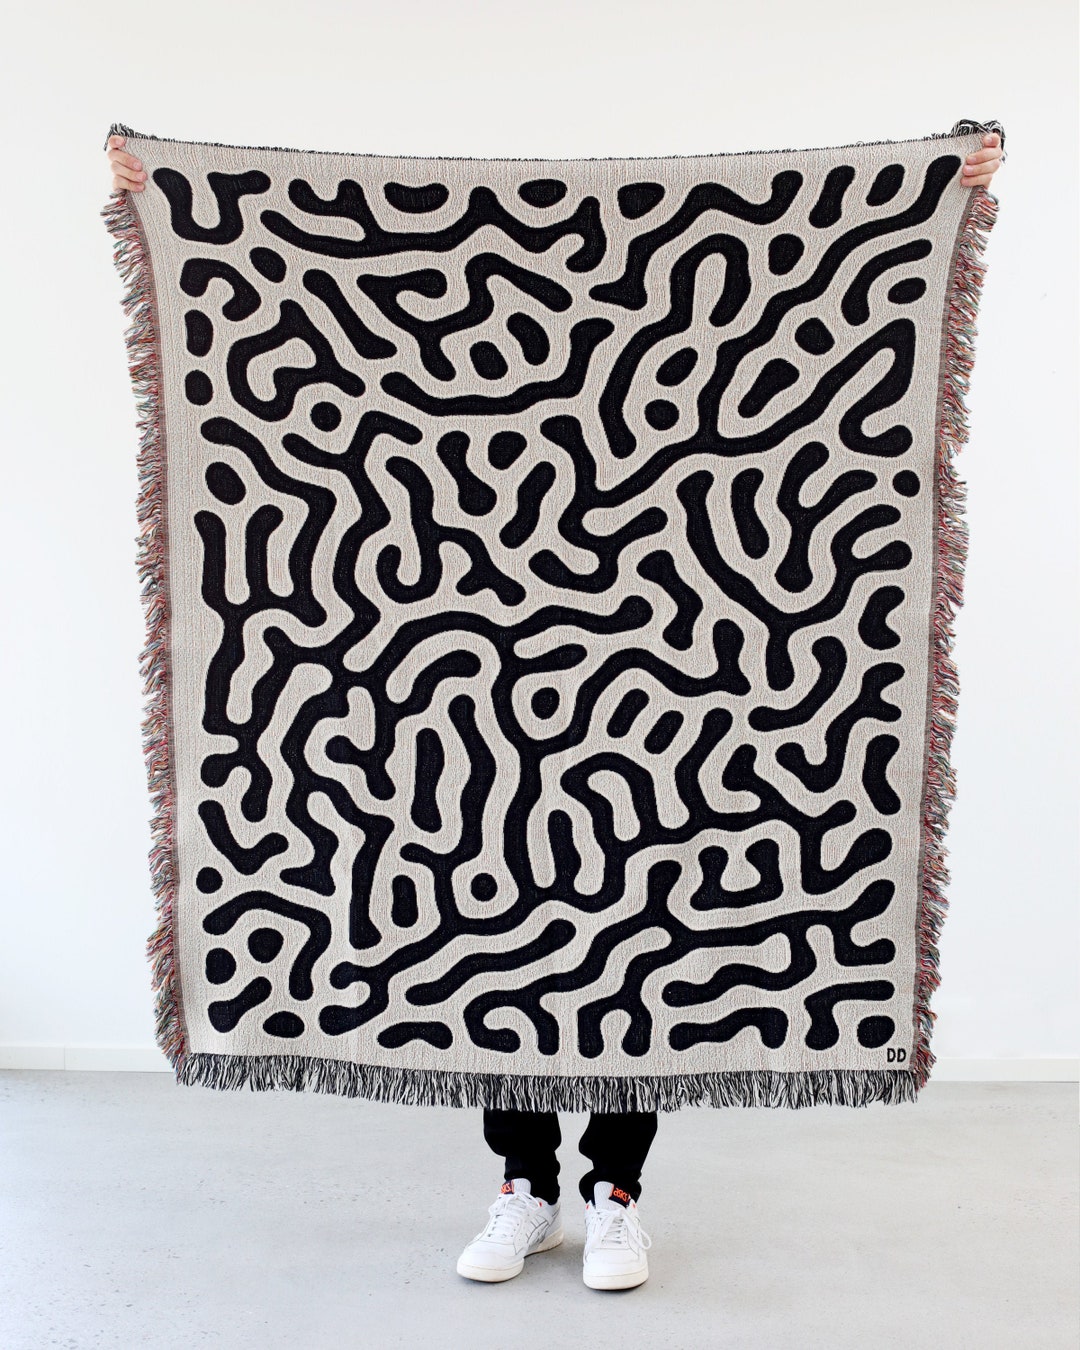 Coral Woven Art Blanket By Adria Molins. Tapestry / Gobelin / Throw Blanket / Woven Wall Hanging